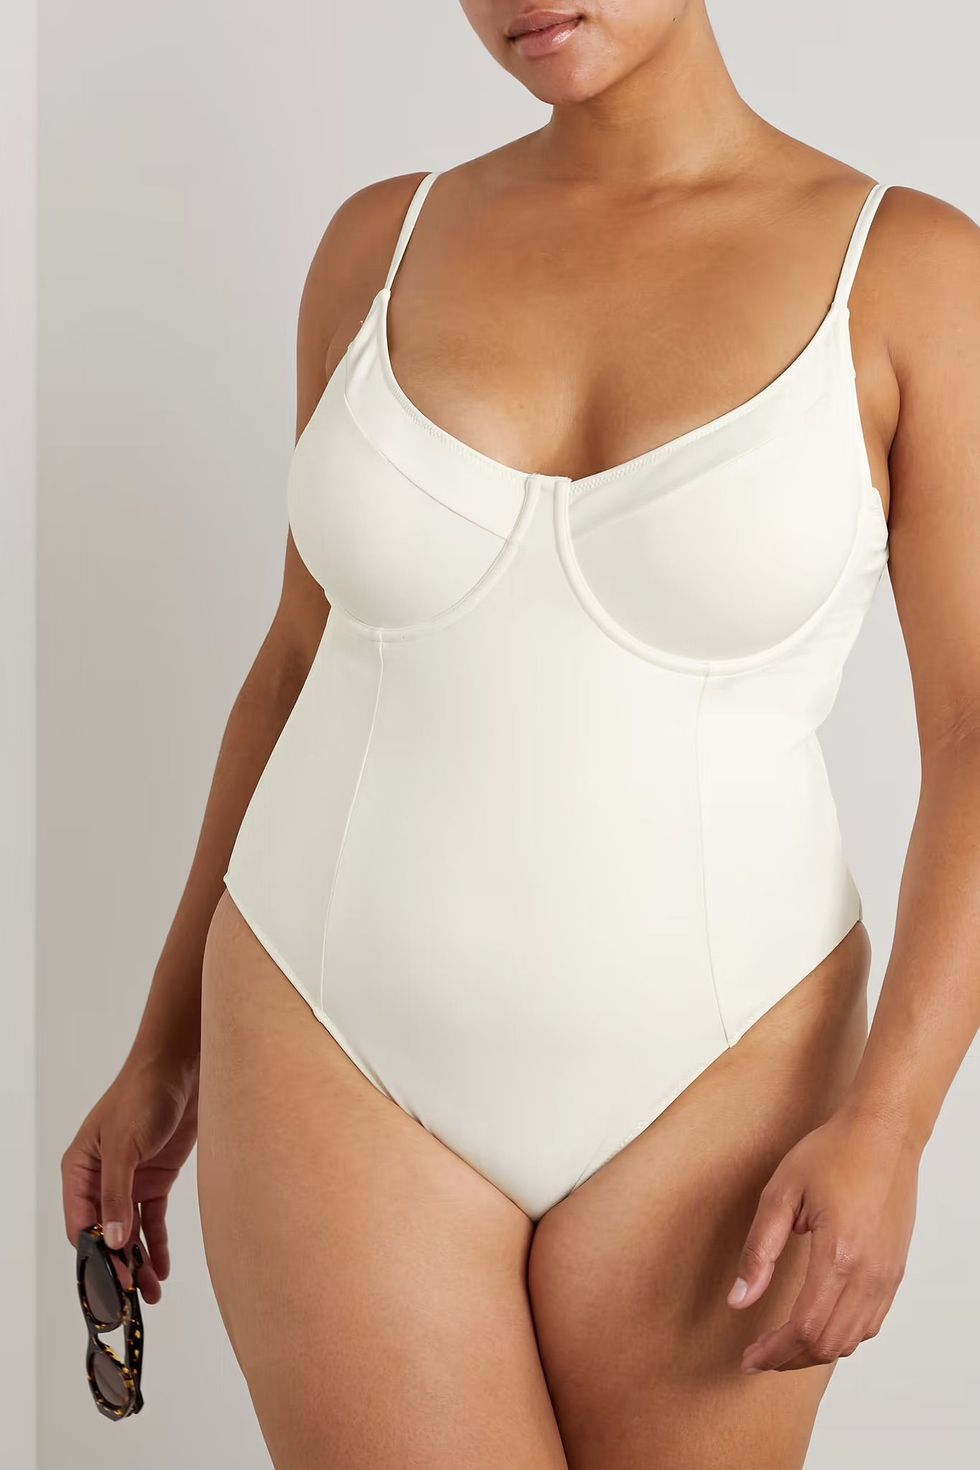 Women's Plus Size Swimsuits With Underwire at  –  Swimsuits Just For Us